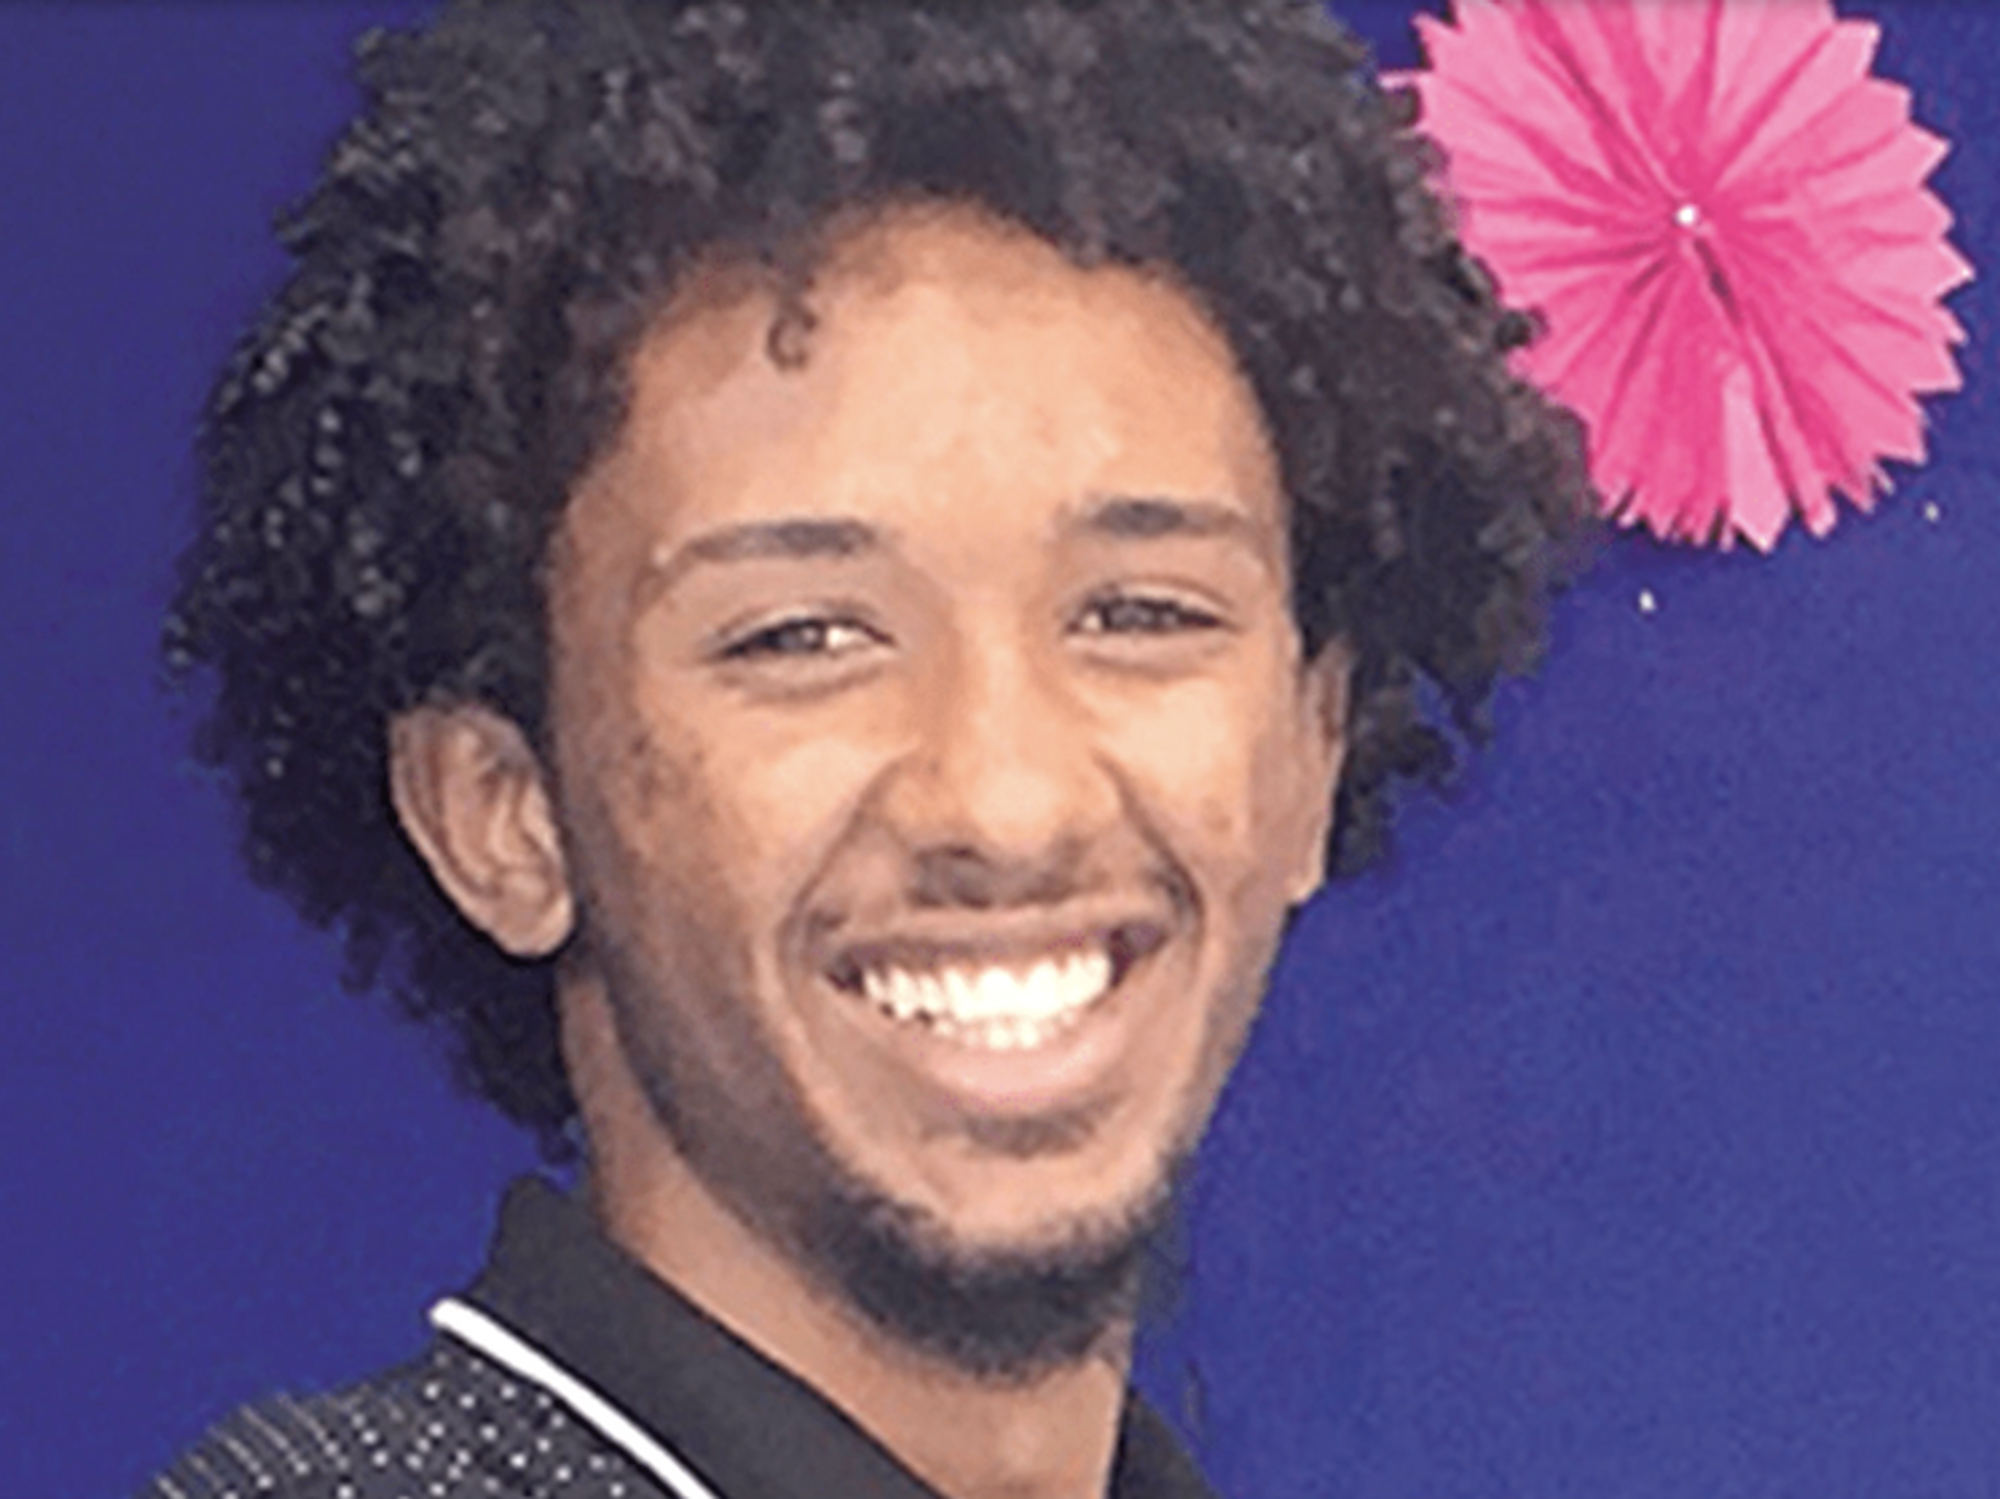 #JusticeForGiovani, Cape Verde Demands Answers in the 'Barbaric' Death of 21-Year-Old Student In Portugal